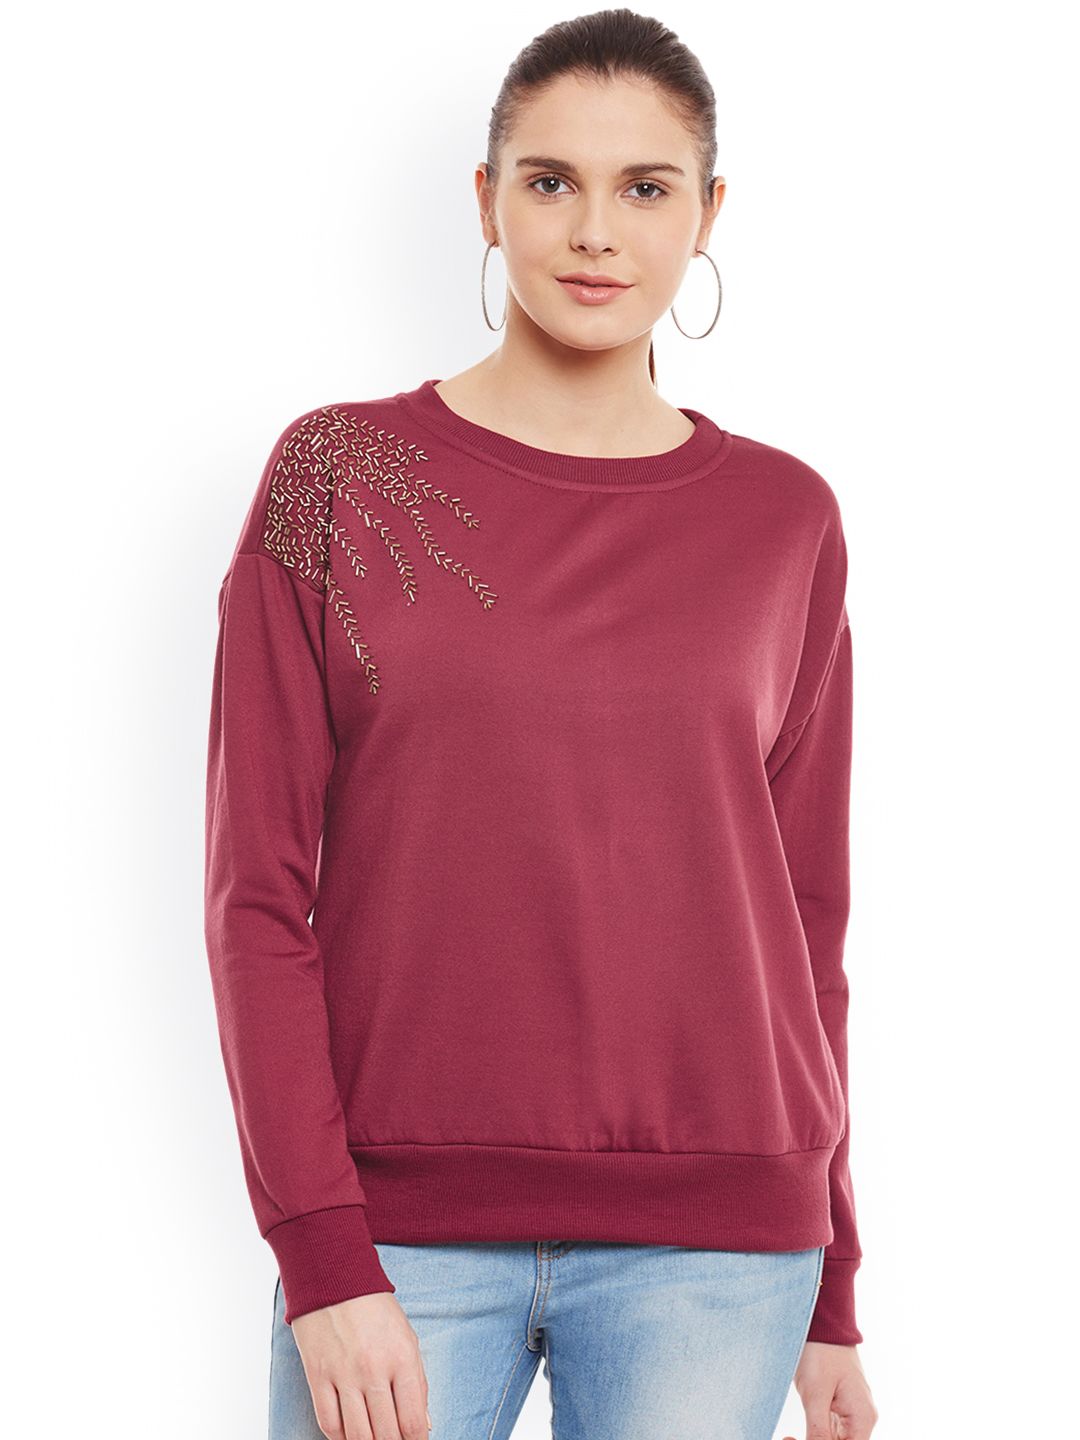 Belle Fille Maroon Sweatshirt with Embellished Detail Price in India